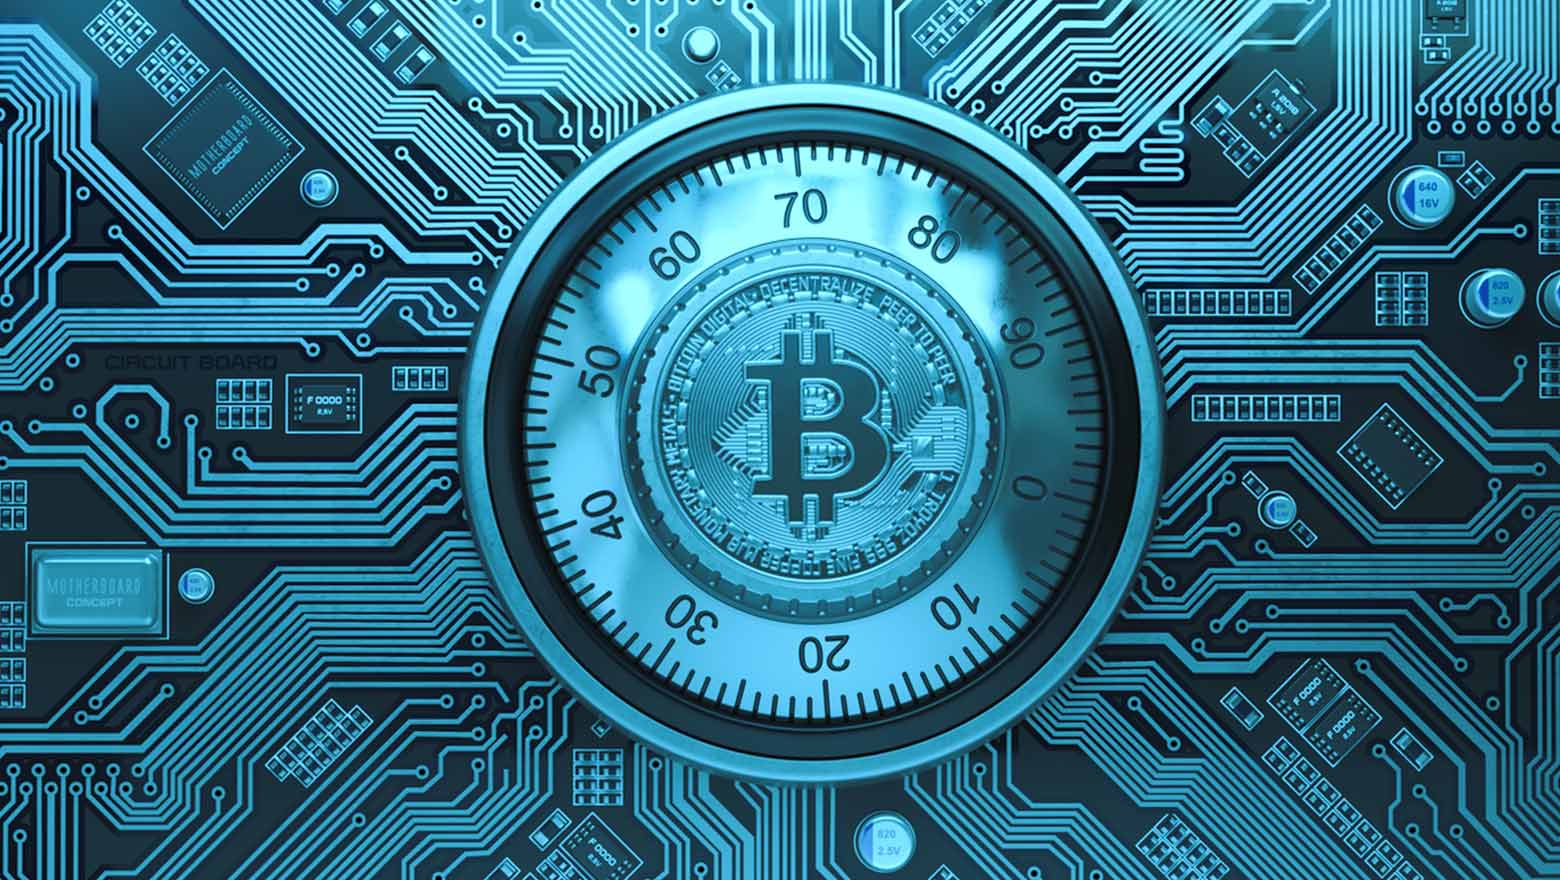 bitcoin-cryptocurrency-vault-safelock_SOIN20003_905168316_is_1560x880.jpg